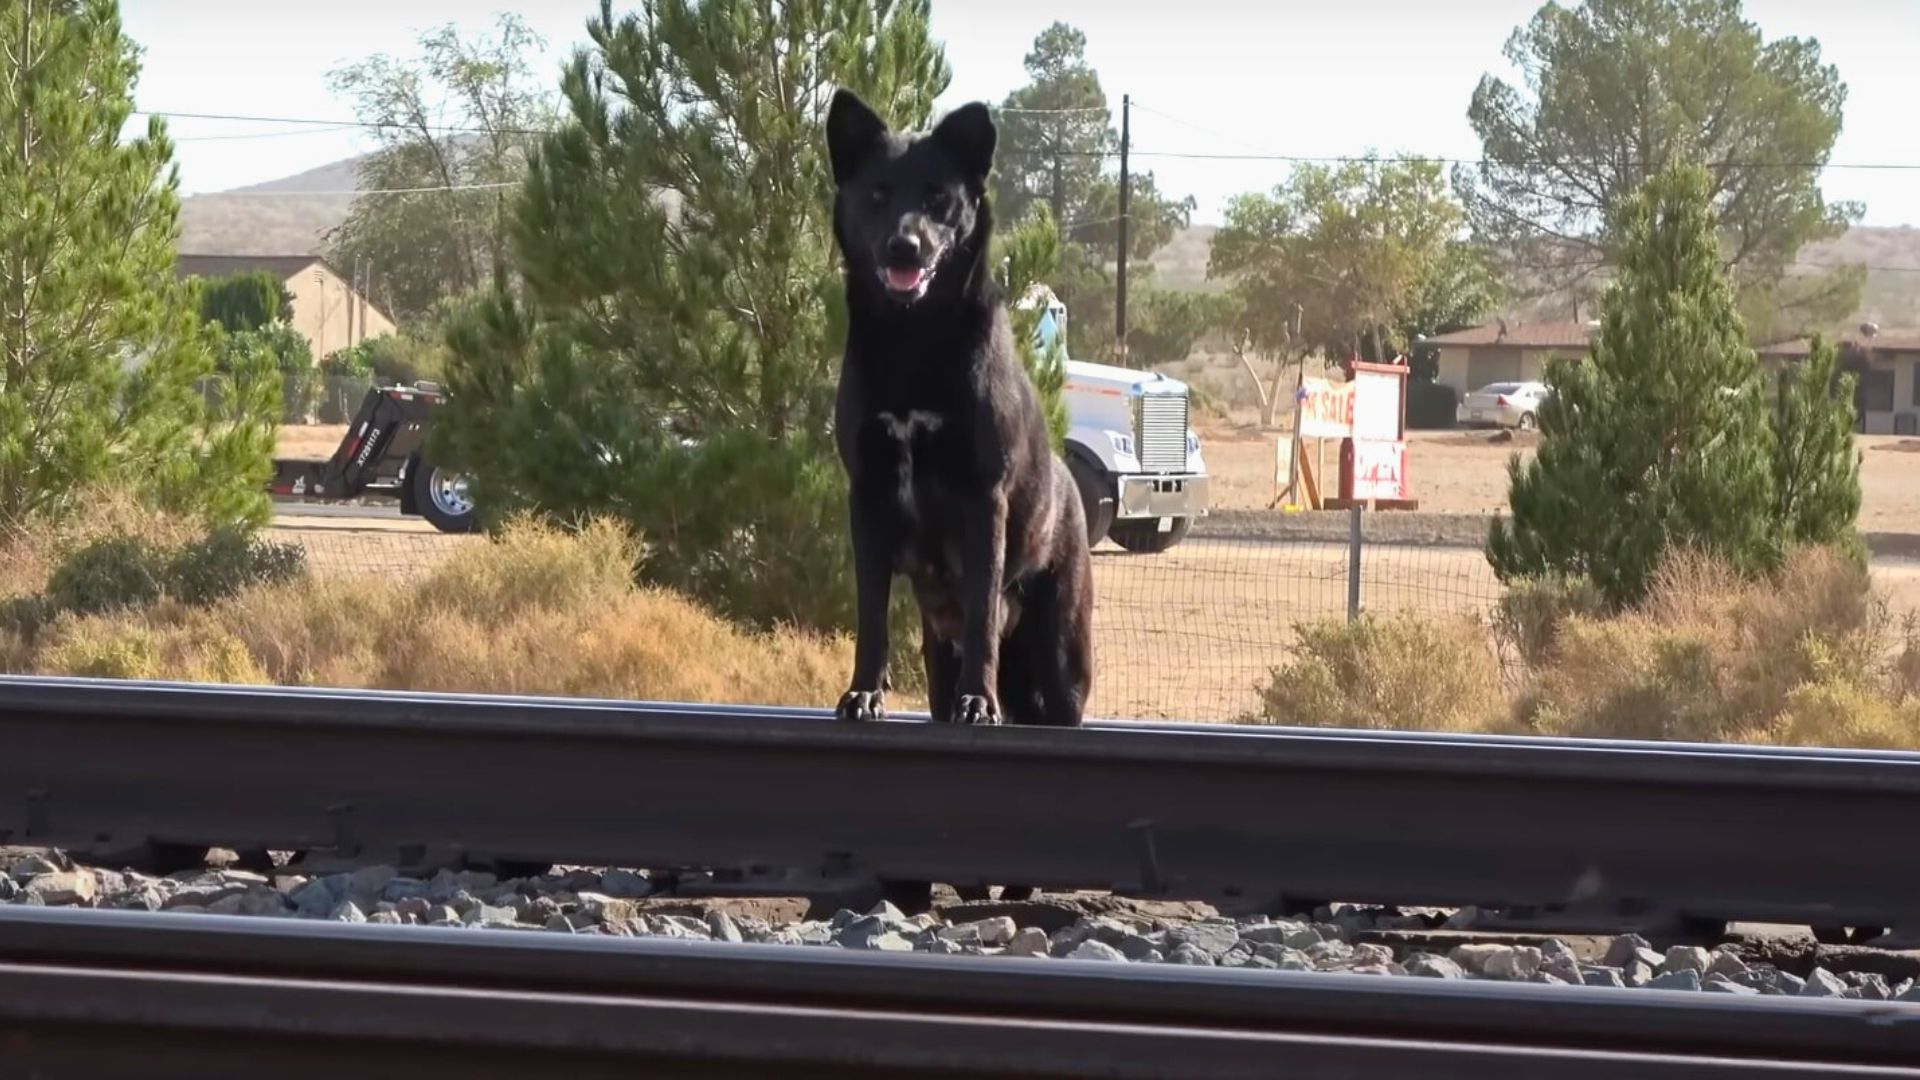 Mom Dog Keeps Crossing Busy Railroad Tracks In Search Of Food For Her Babies